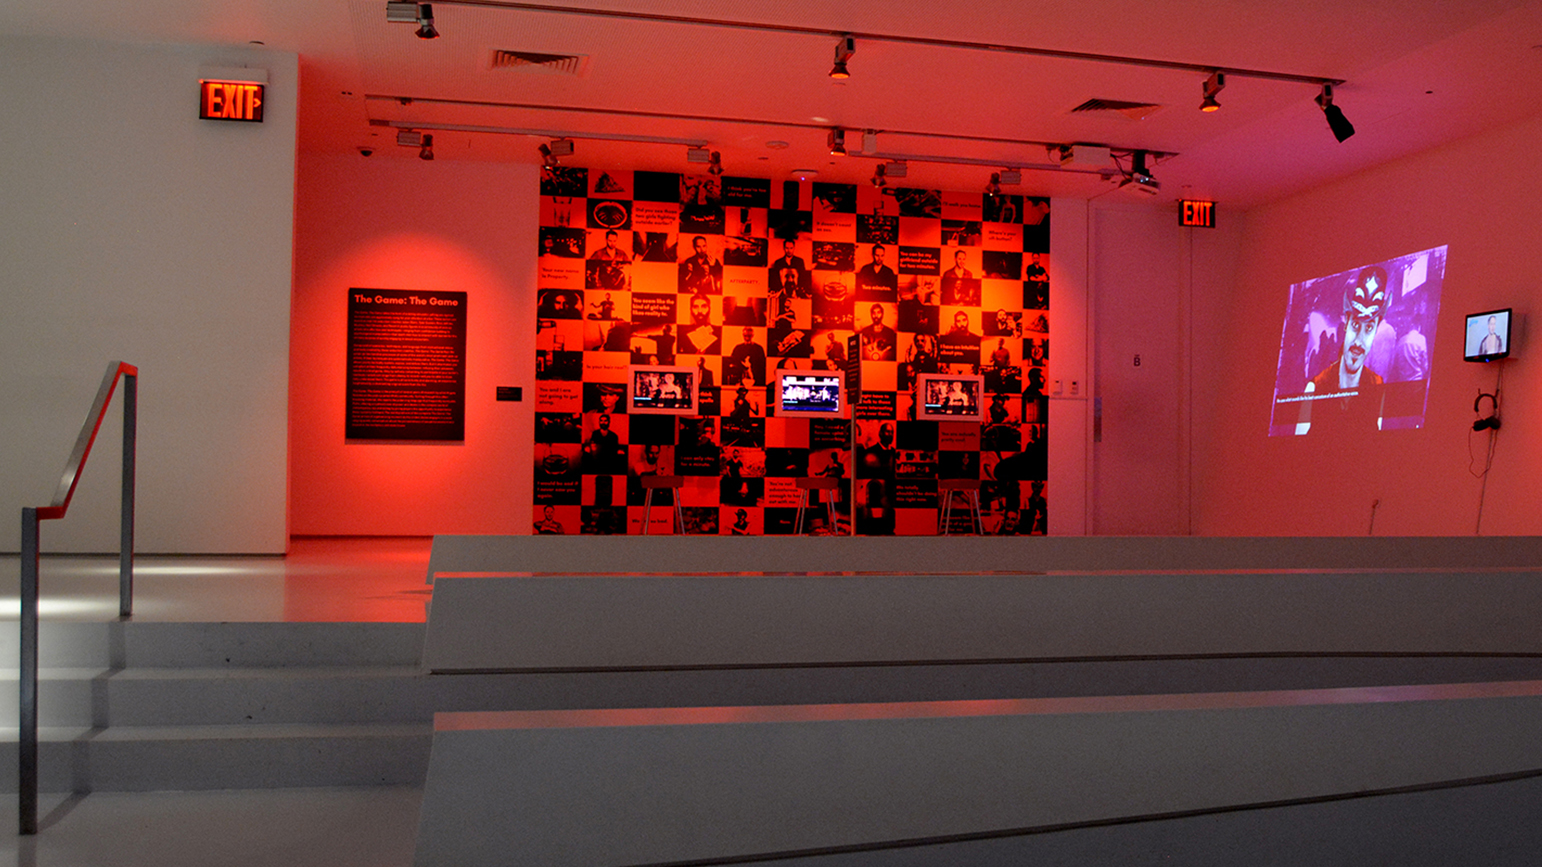 Angela Washko's "The Game: The Game" installed at the Museum of the Moving Image